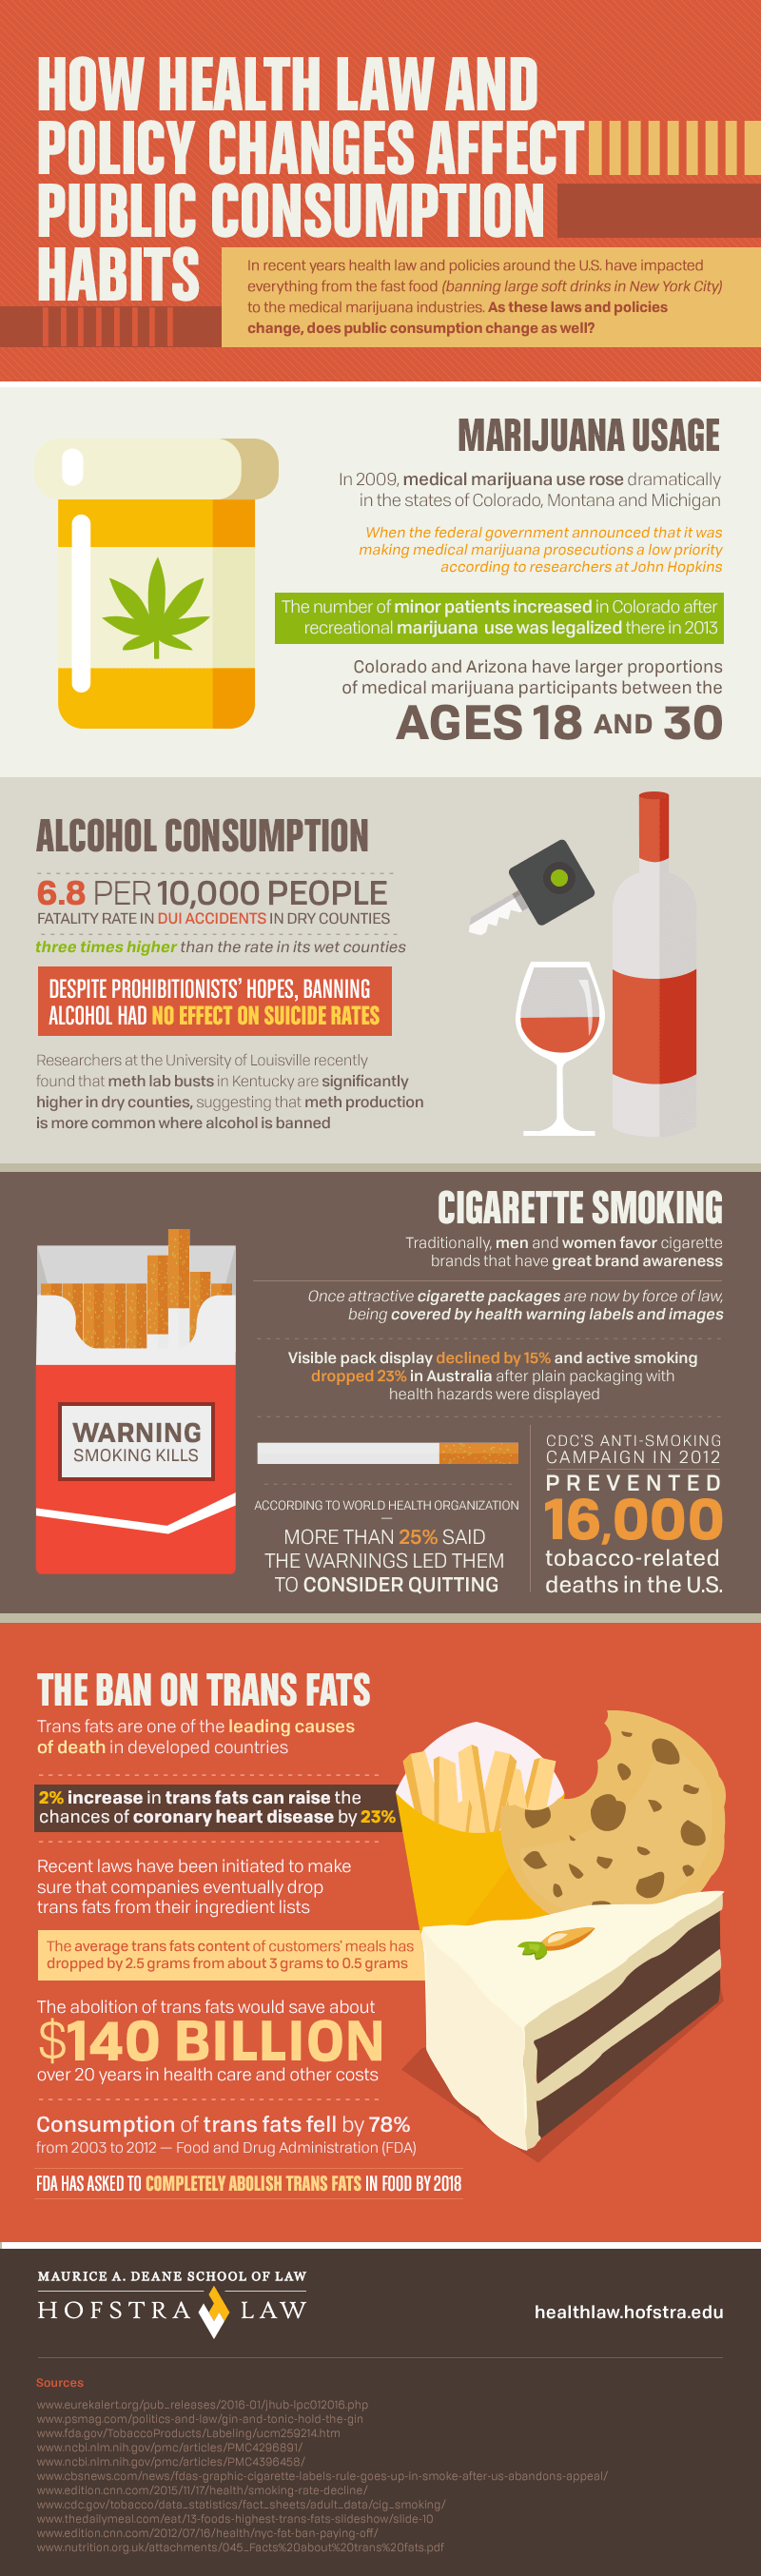 Laws and Campaigns Help Reduce Smoking